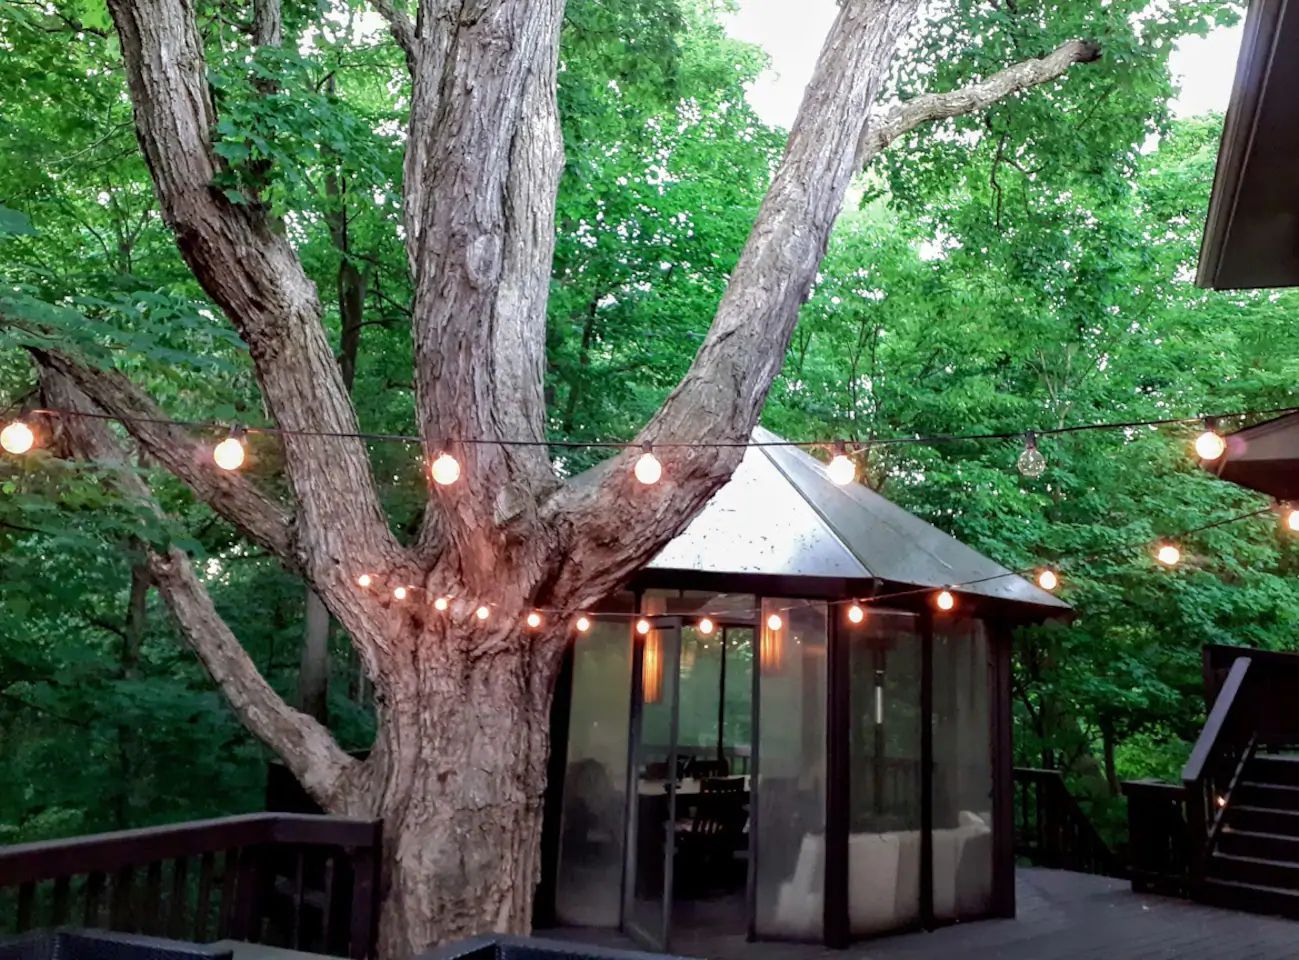 Screened gazebo with twinkling lights on patio with wooden floor large tree trunk in foreground and green trees in background. A great VRBO cabin rental.